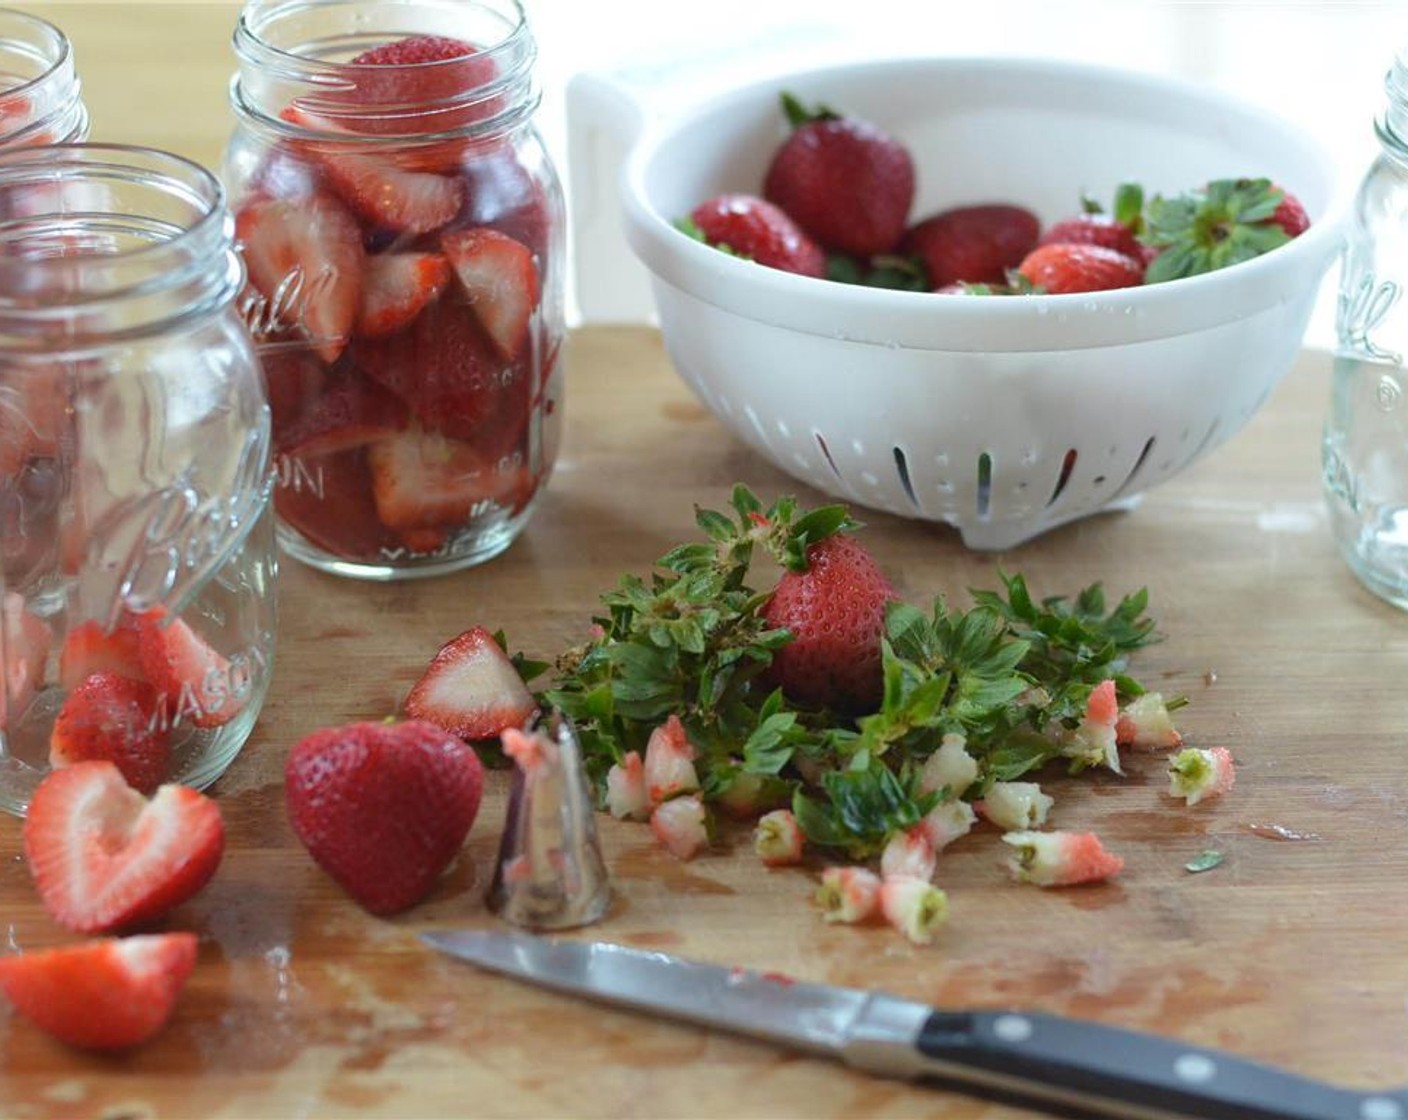 step 2 Remove the stems and cut the strawberries into quarters.